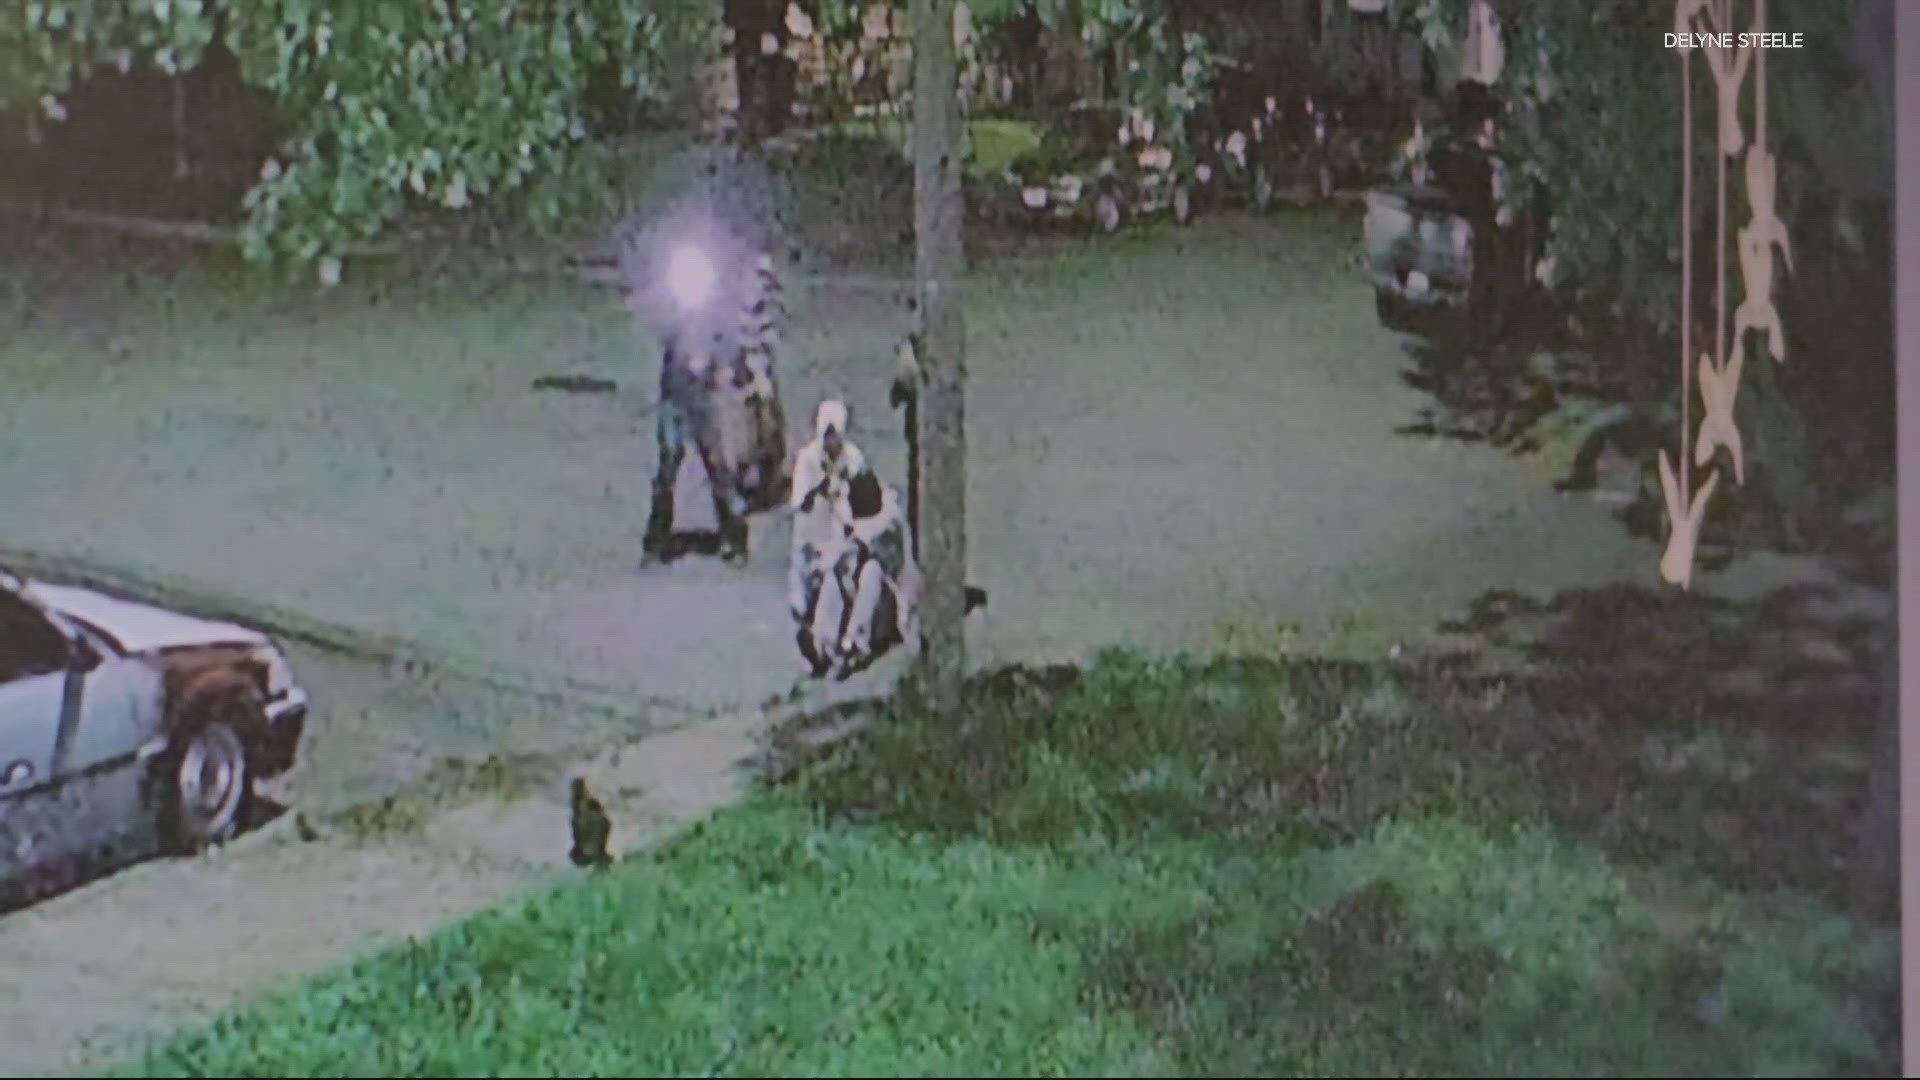 Surveillance video captured footage of five young people killing a family's cat on a sidewalk in the early morning hours of May 10.